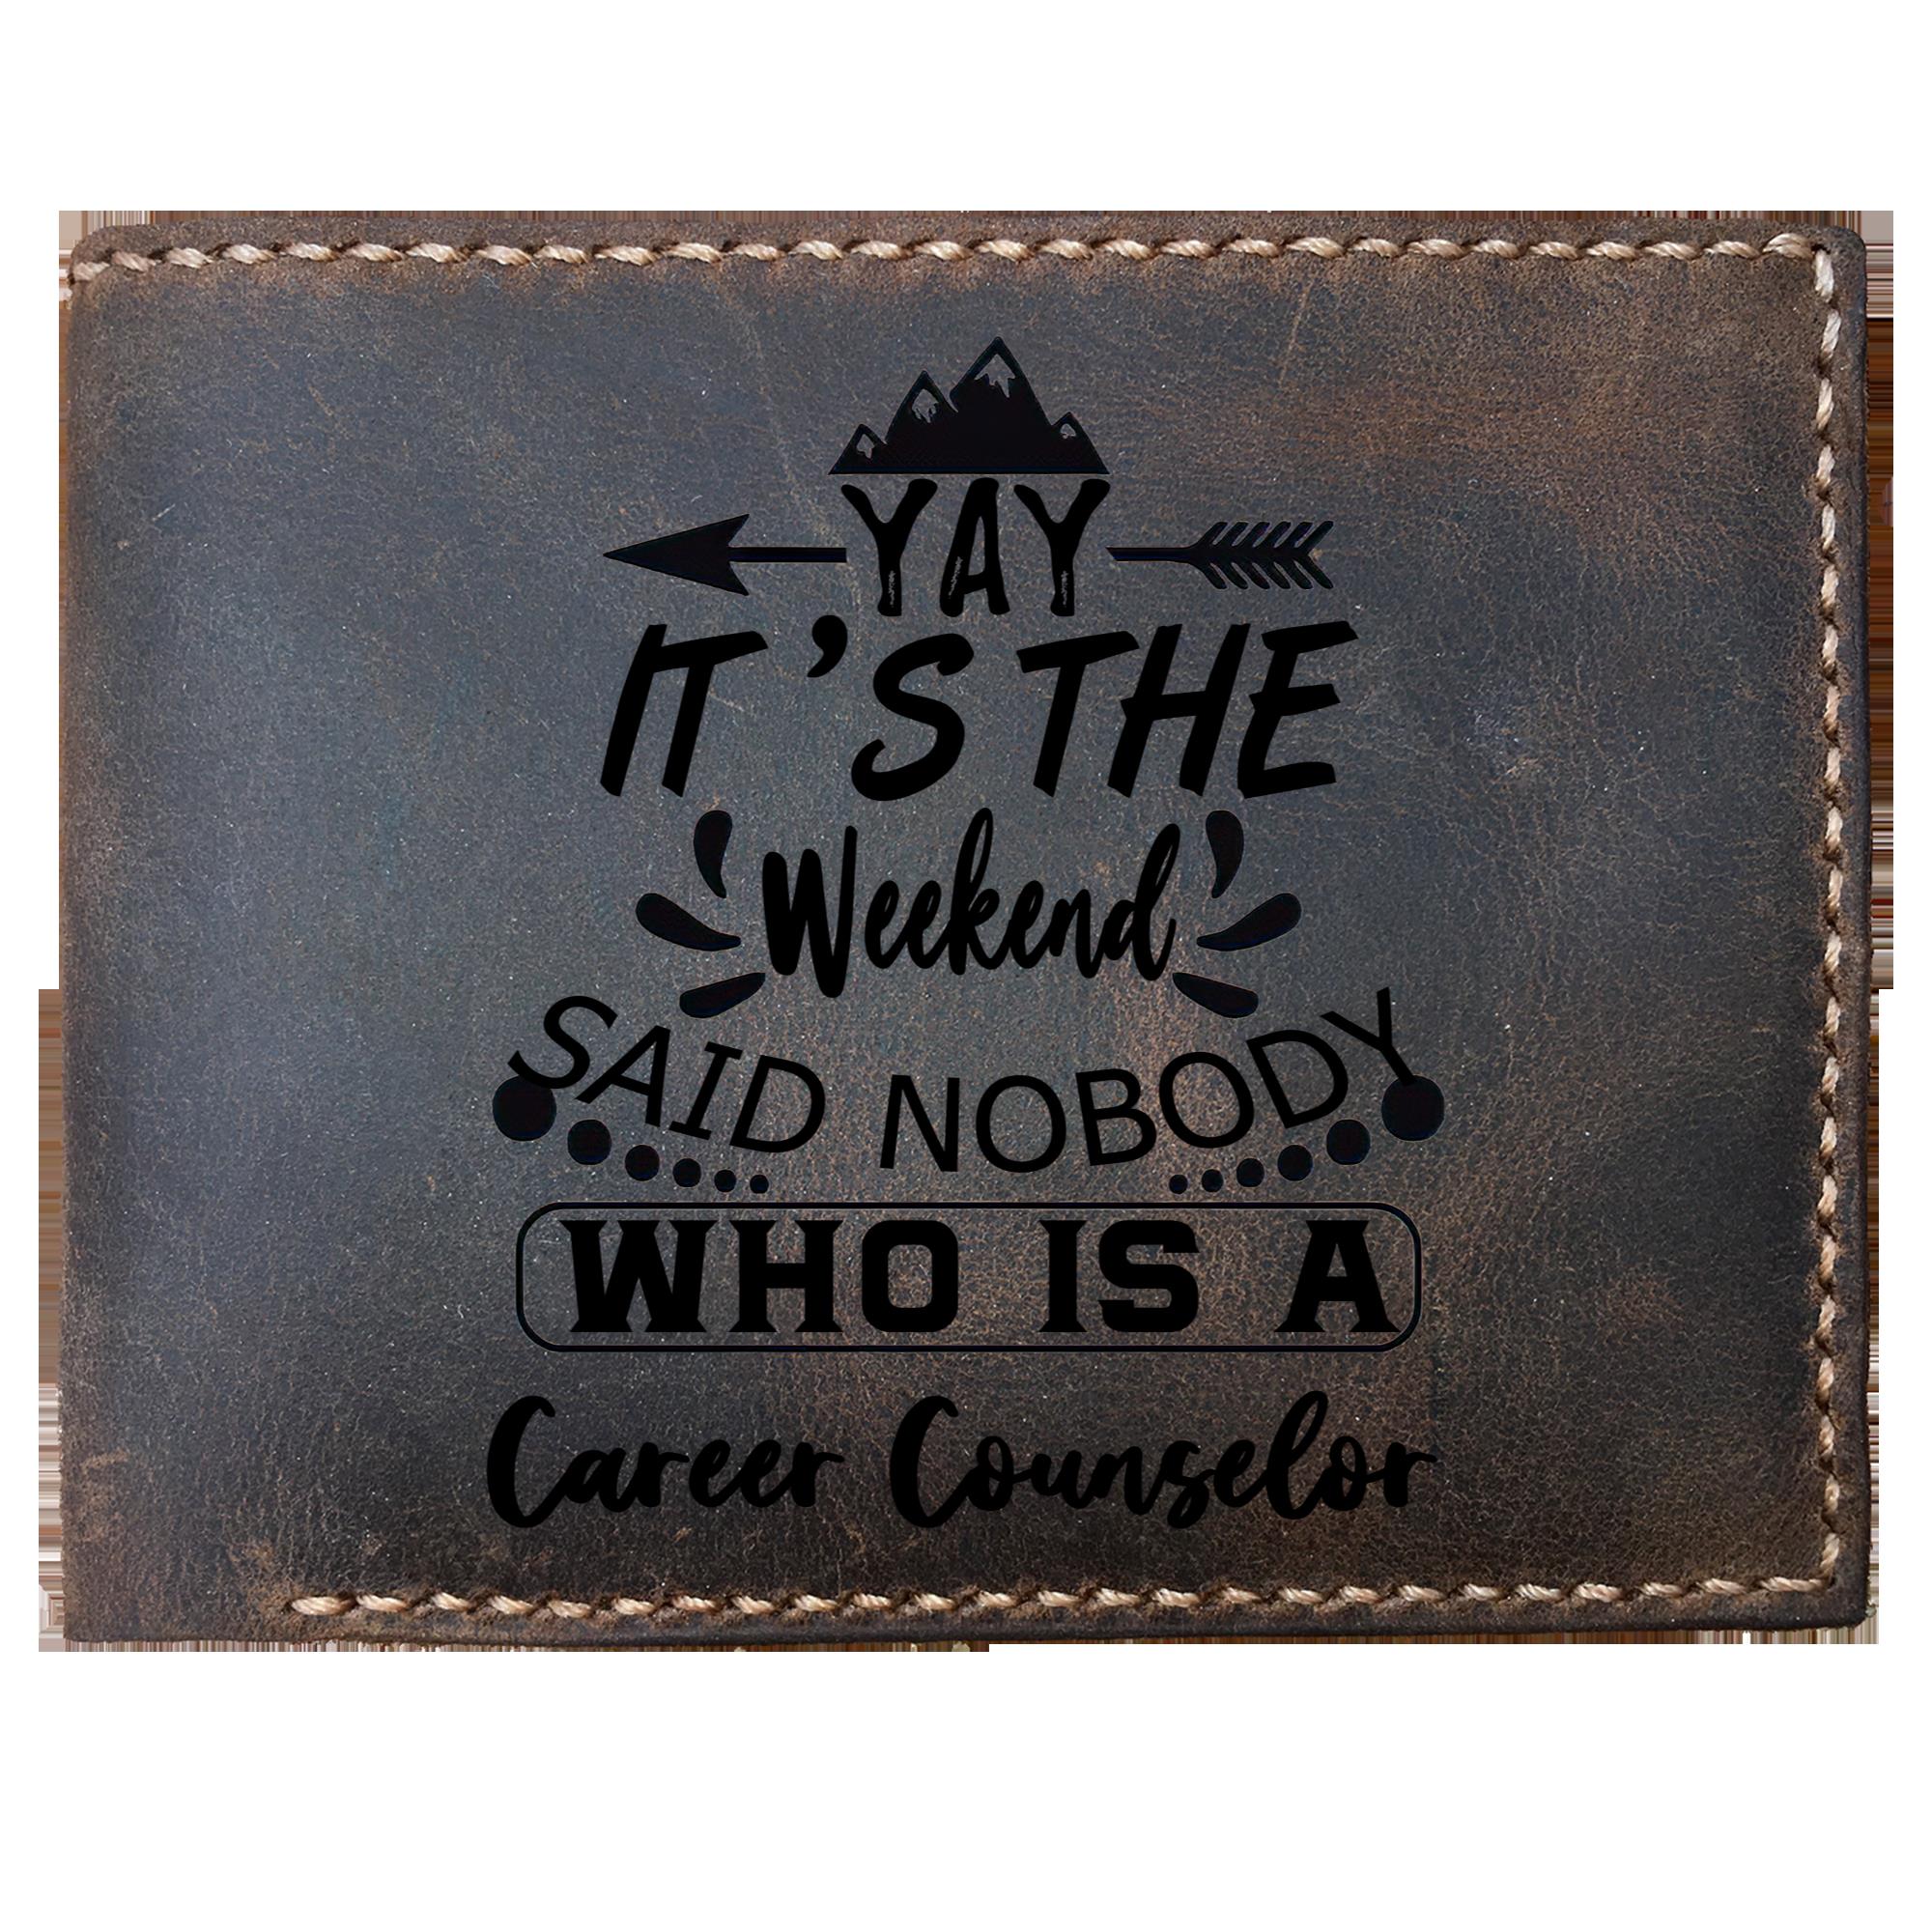 Skitongifts Funny Custom Laser Engraved Bifold Leather Wallet For Men, It's The Weekend Said Nobody Who Is A Career Counselor, Father's Day Gifts